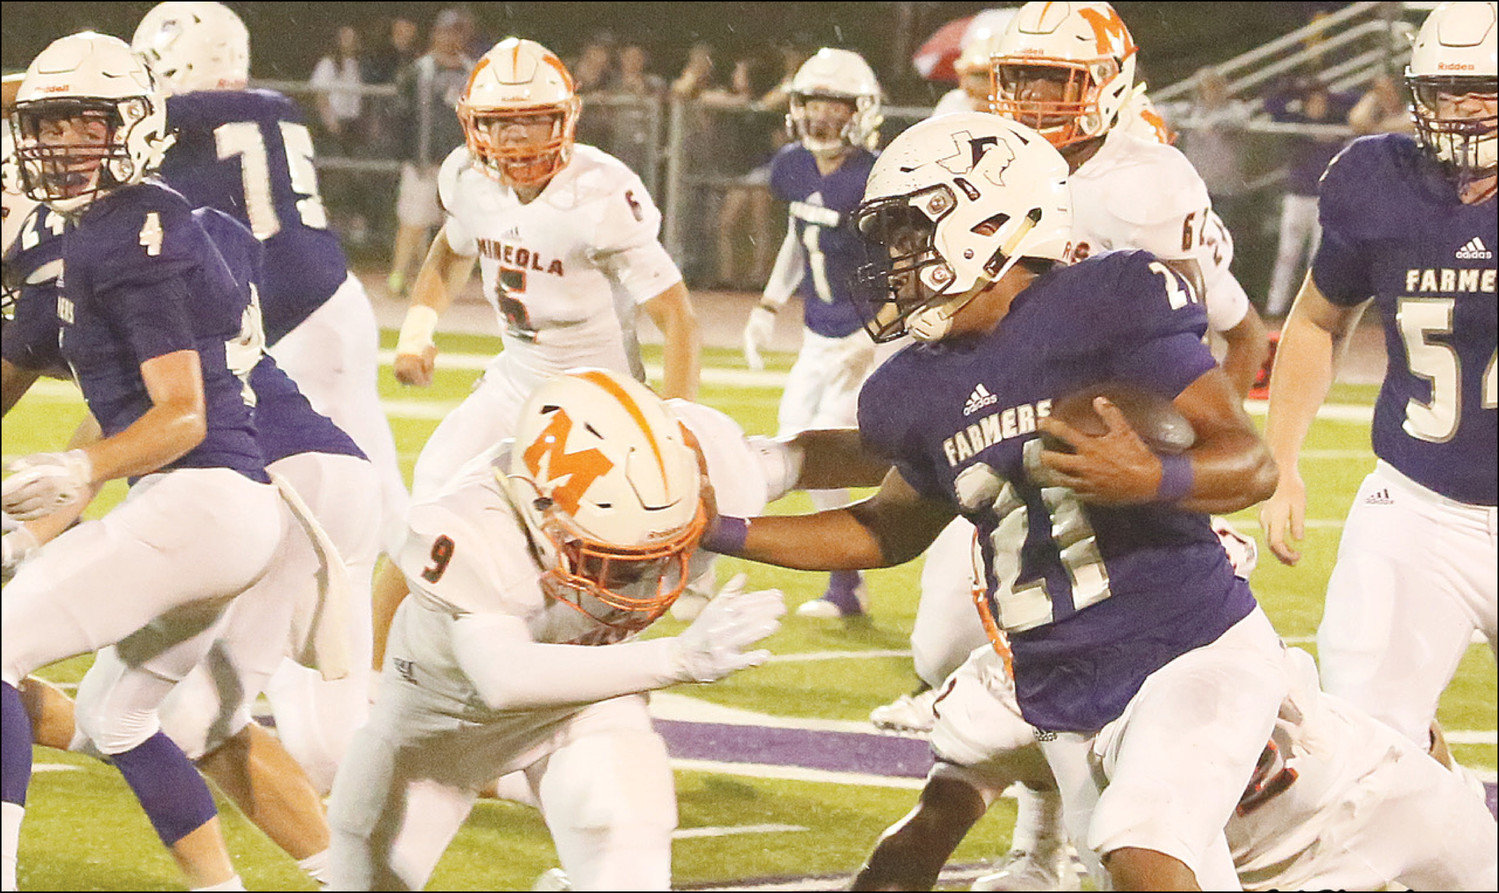 Mineola’s Dalton Rogers makes a great defensive stop to break up a pass play in the ‘Jackets win at Farmersville.